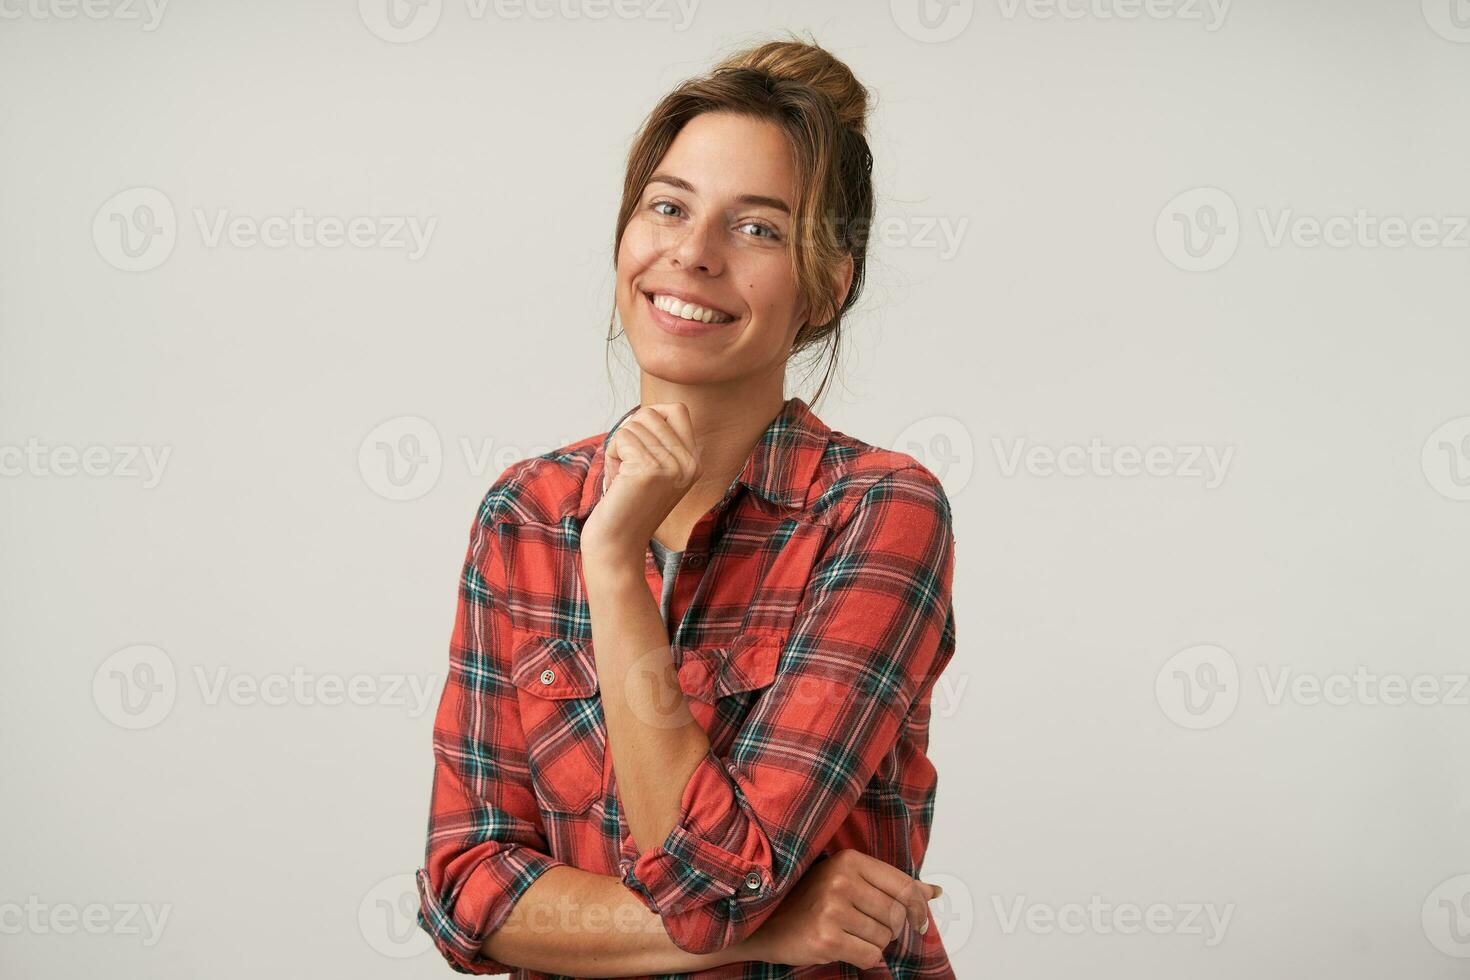 Charming young lovely brown haired woman with natural makeup leaning her chin on raised hand while looking cheerfully at camera with wide smile, posing over white background photo